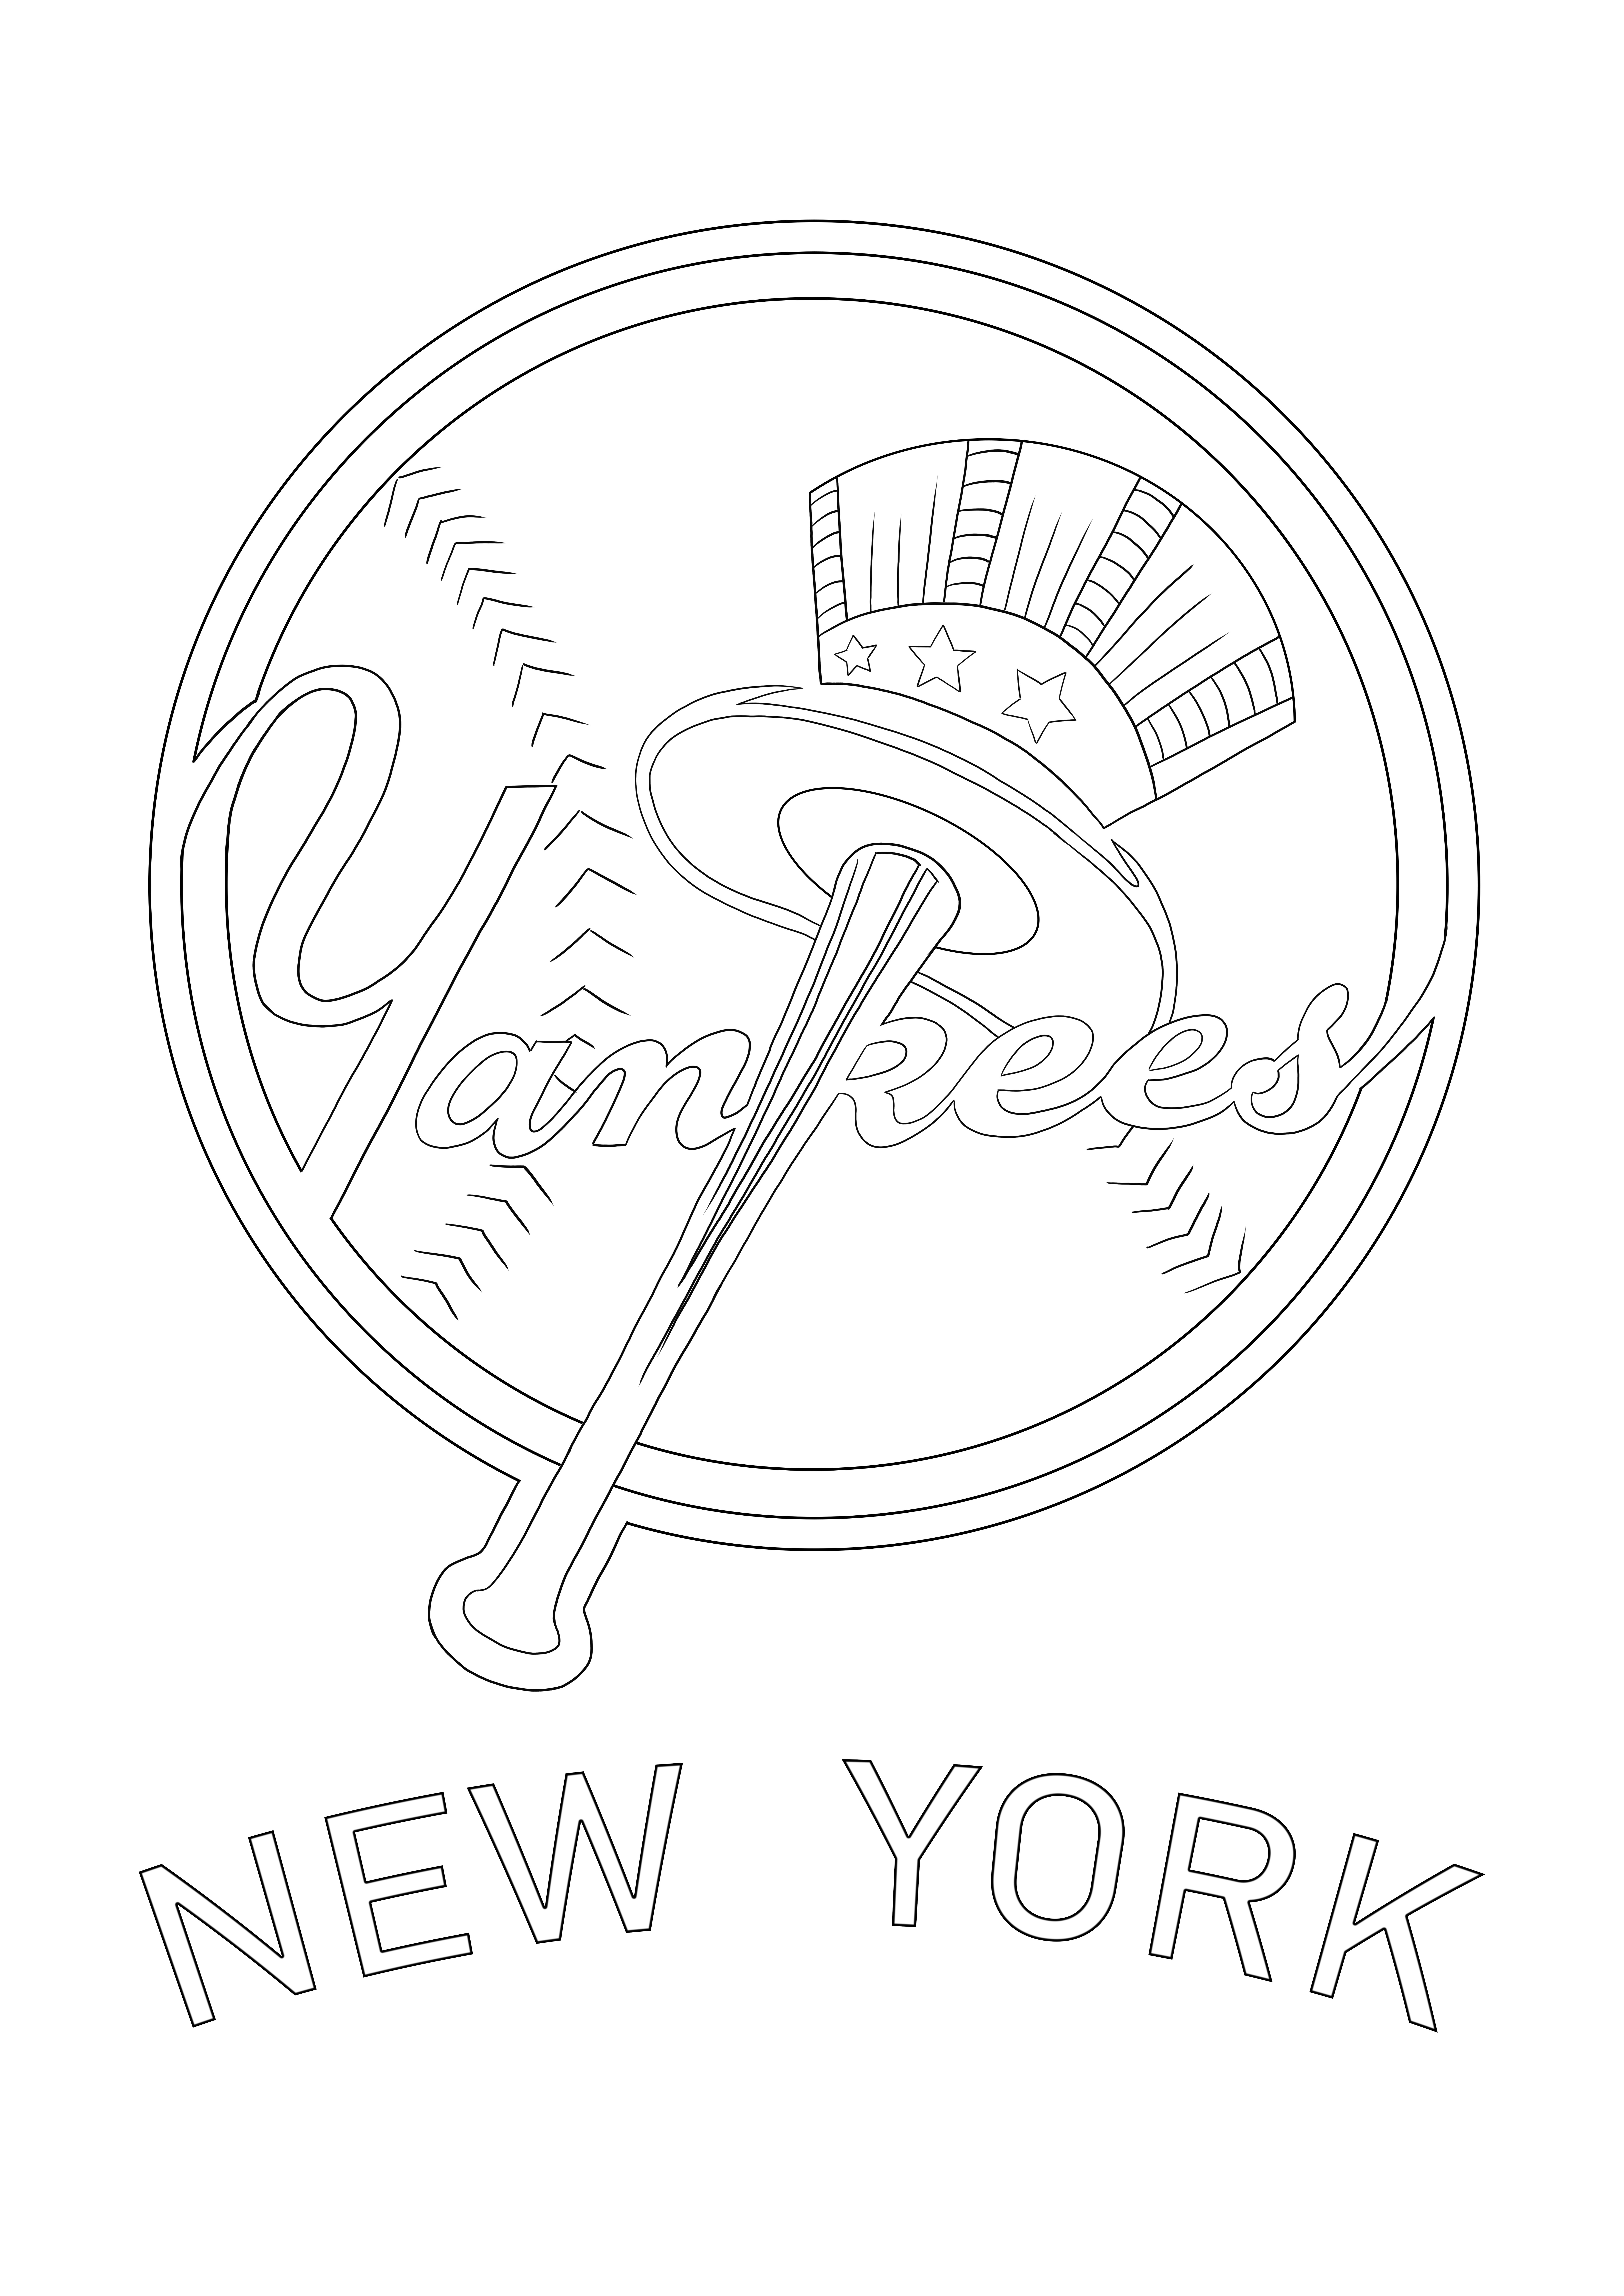 New York Yankees Logo free to download or save for later coloring image